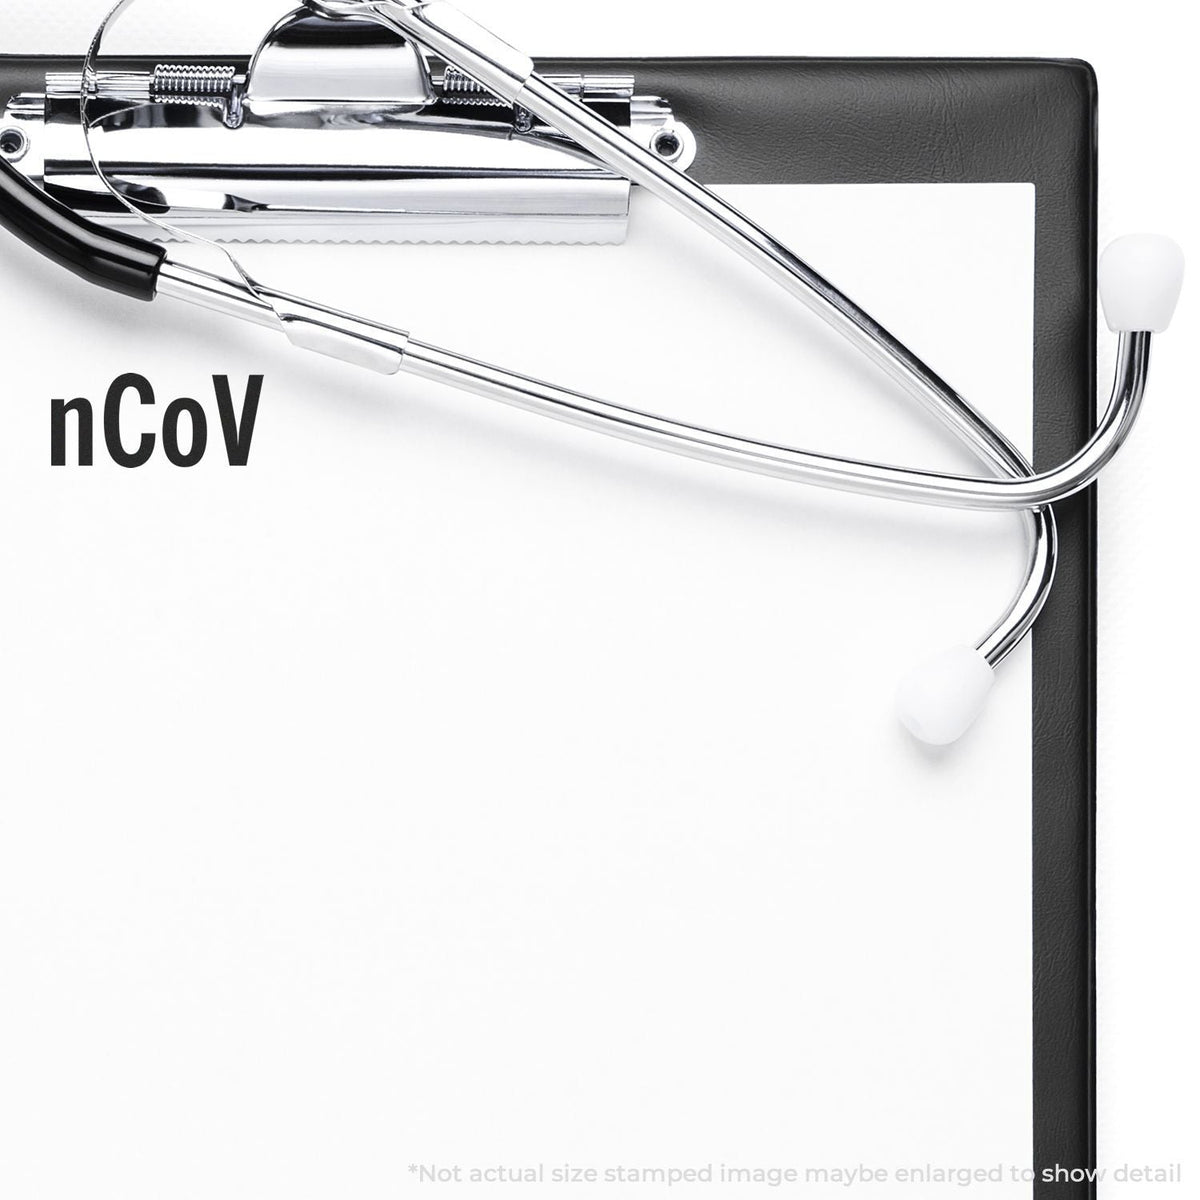 In Use Self-Inking nCov Stamp Image